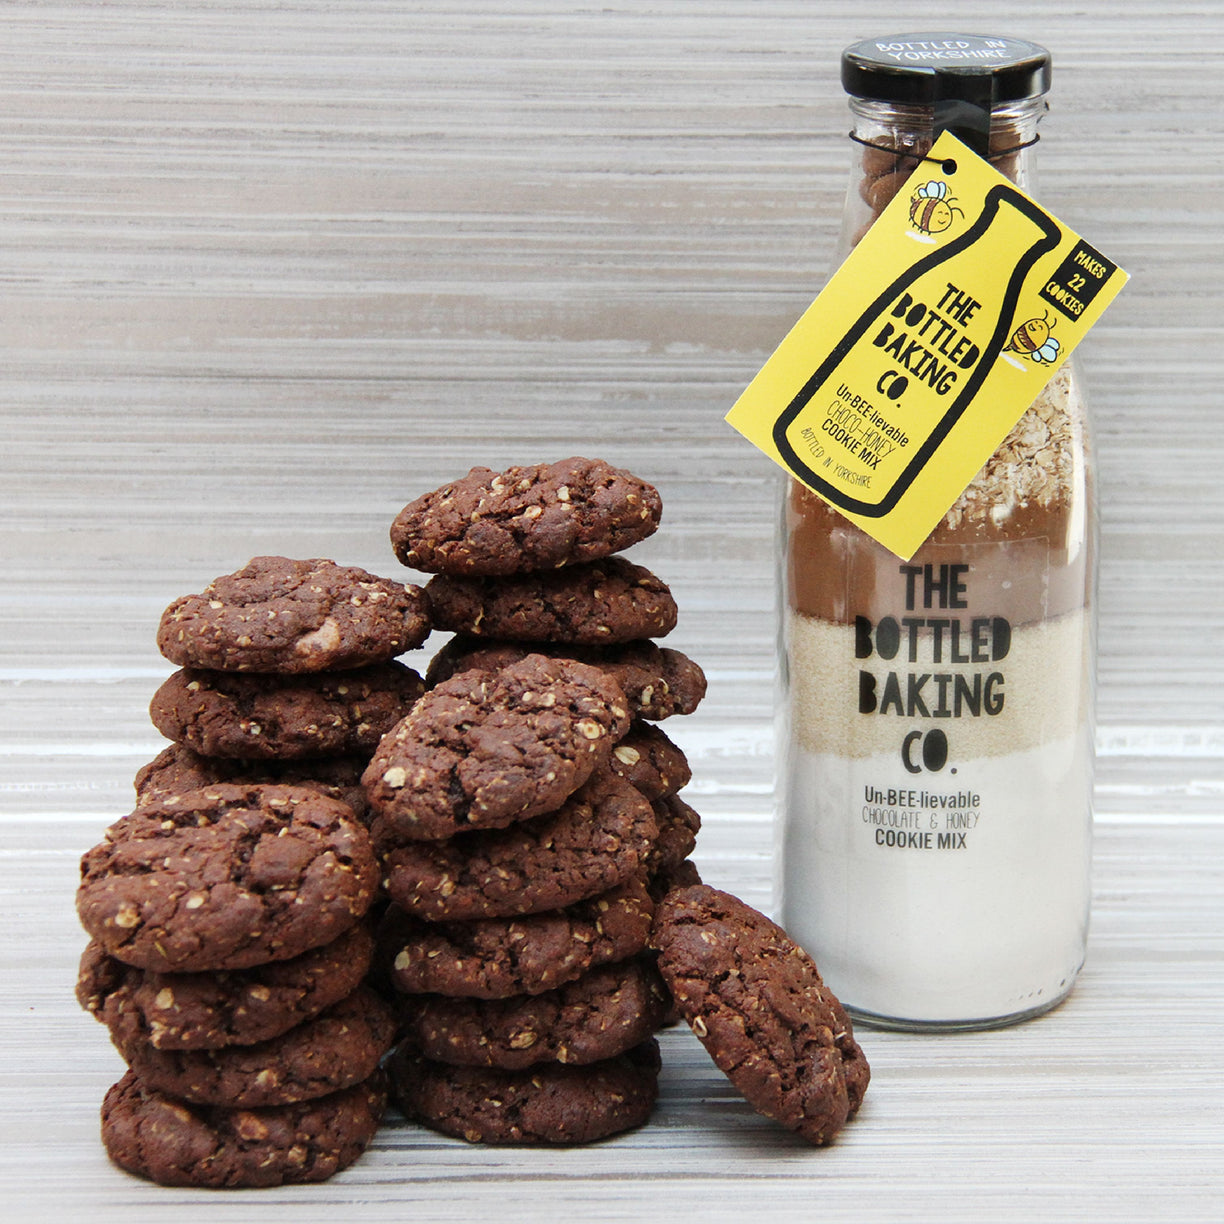 Un-BEE-lievable Choco-Honey Cookie Mix in a Bottle